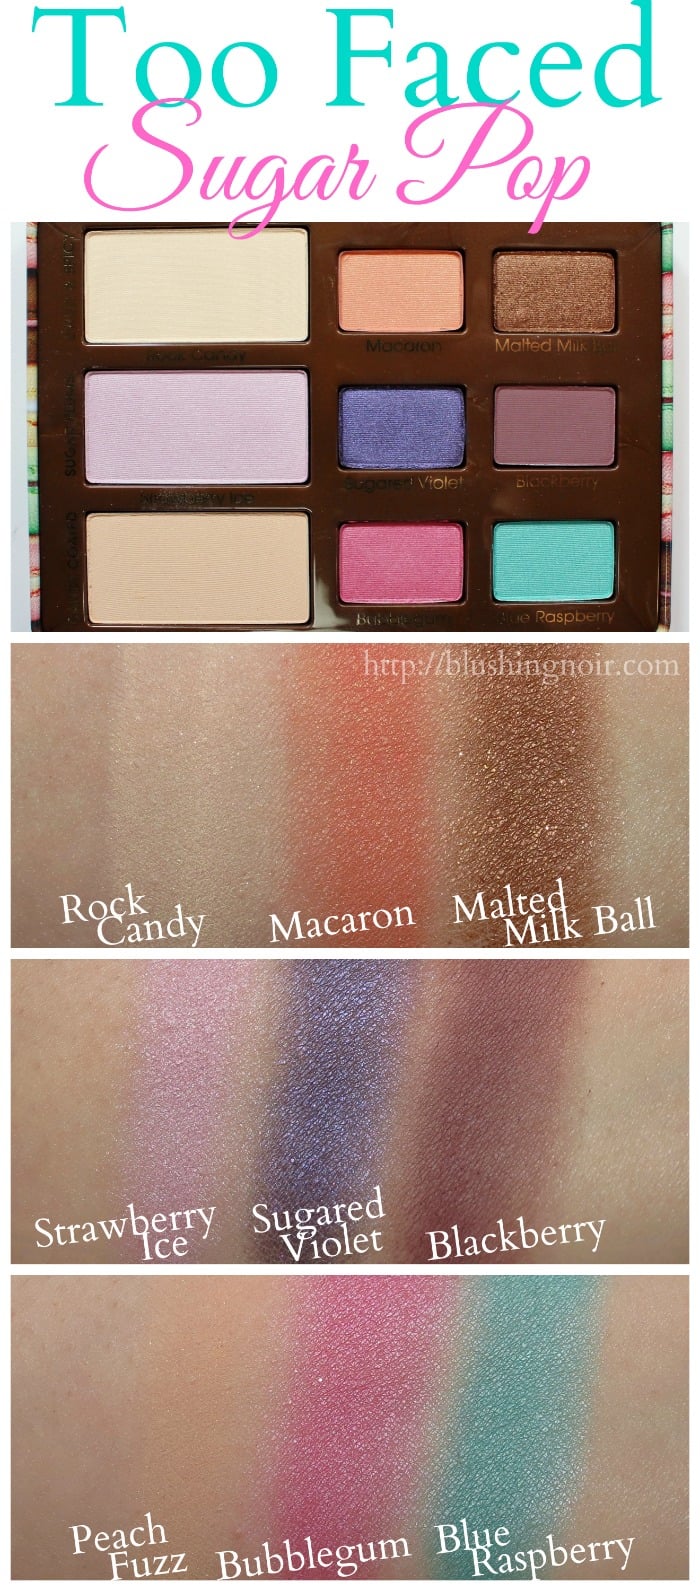 Too Faced Sugar Pop Palette Swatches